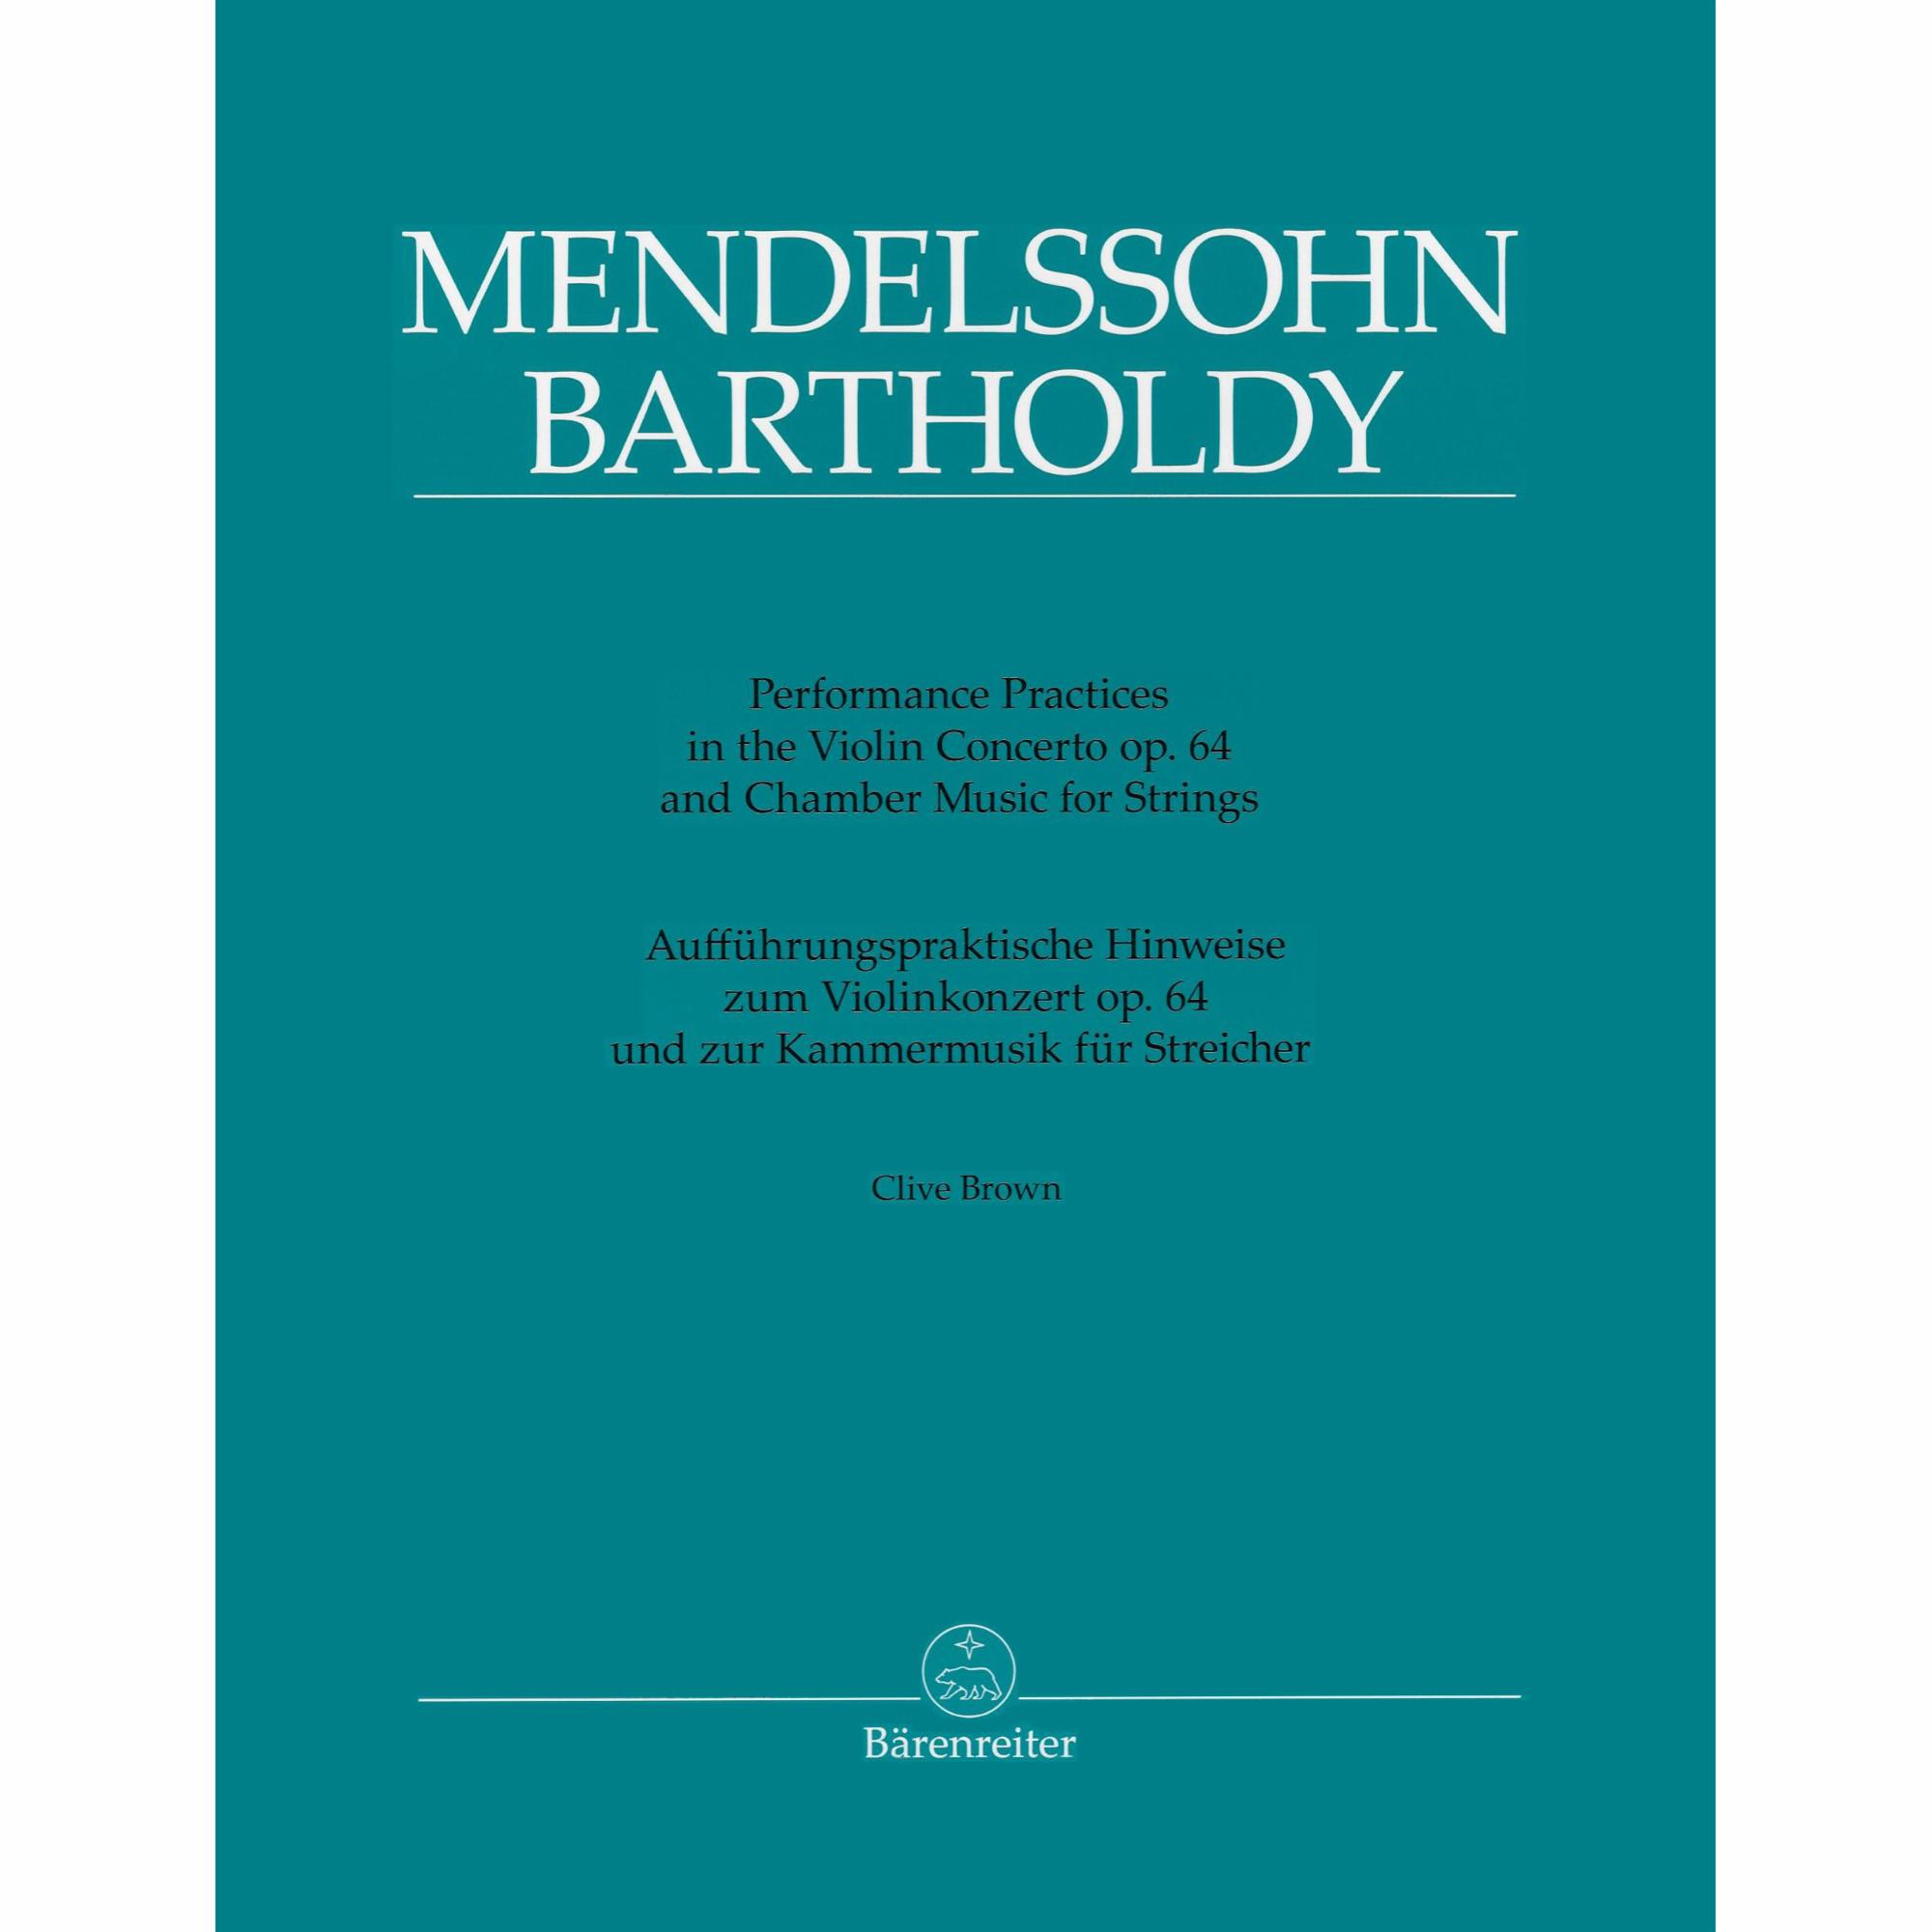 Mendelssohn -- Performance Practices in the Violin Concerto, Op. 64 and Chamber Music for Strings